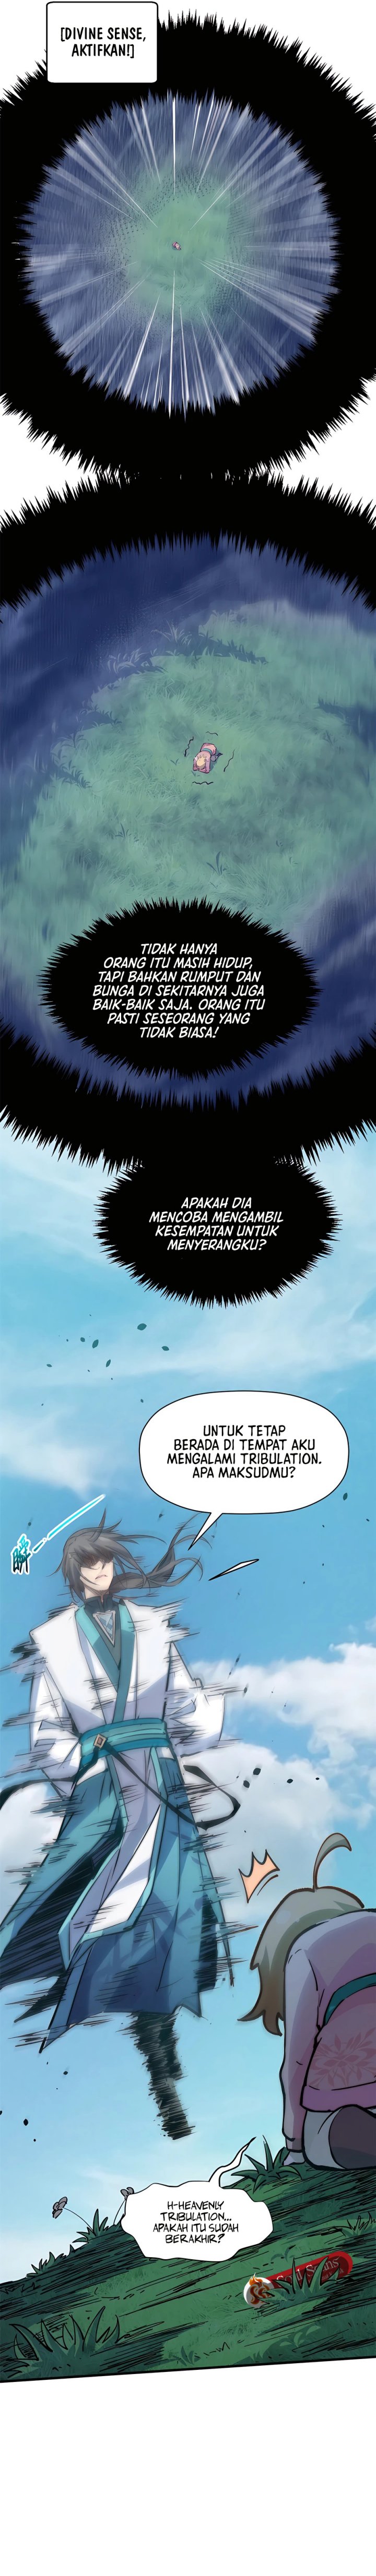 Dilarang COPAS - situs resmi www.mangacanblog.com - Komik top tier providence secretly cultivate for a thousand years 116 - chapter 116 117 Indonesia top tier providence secretly cultivate for a thousand years 116 - chapter 116 Terbaru 16|Baca Manga Komik Indonesia|Mangacan